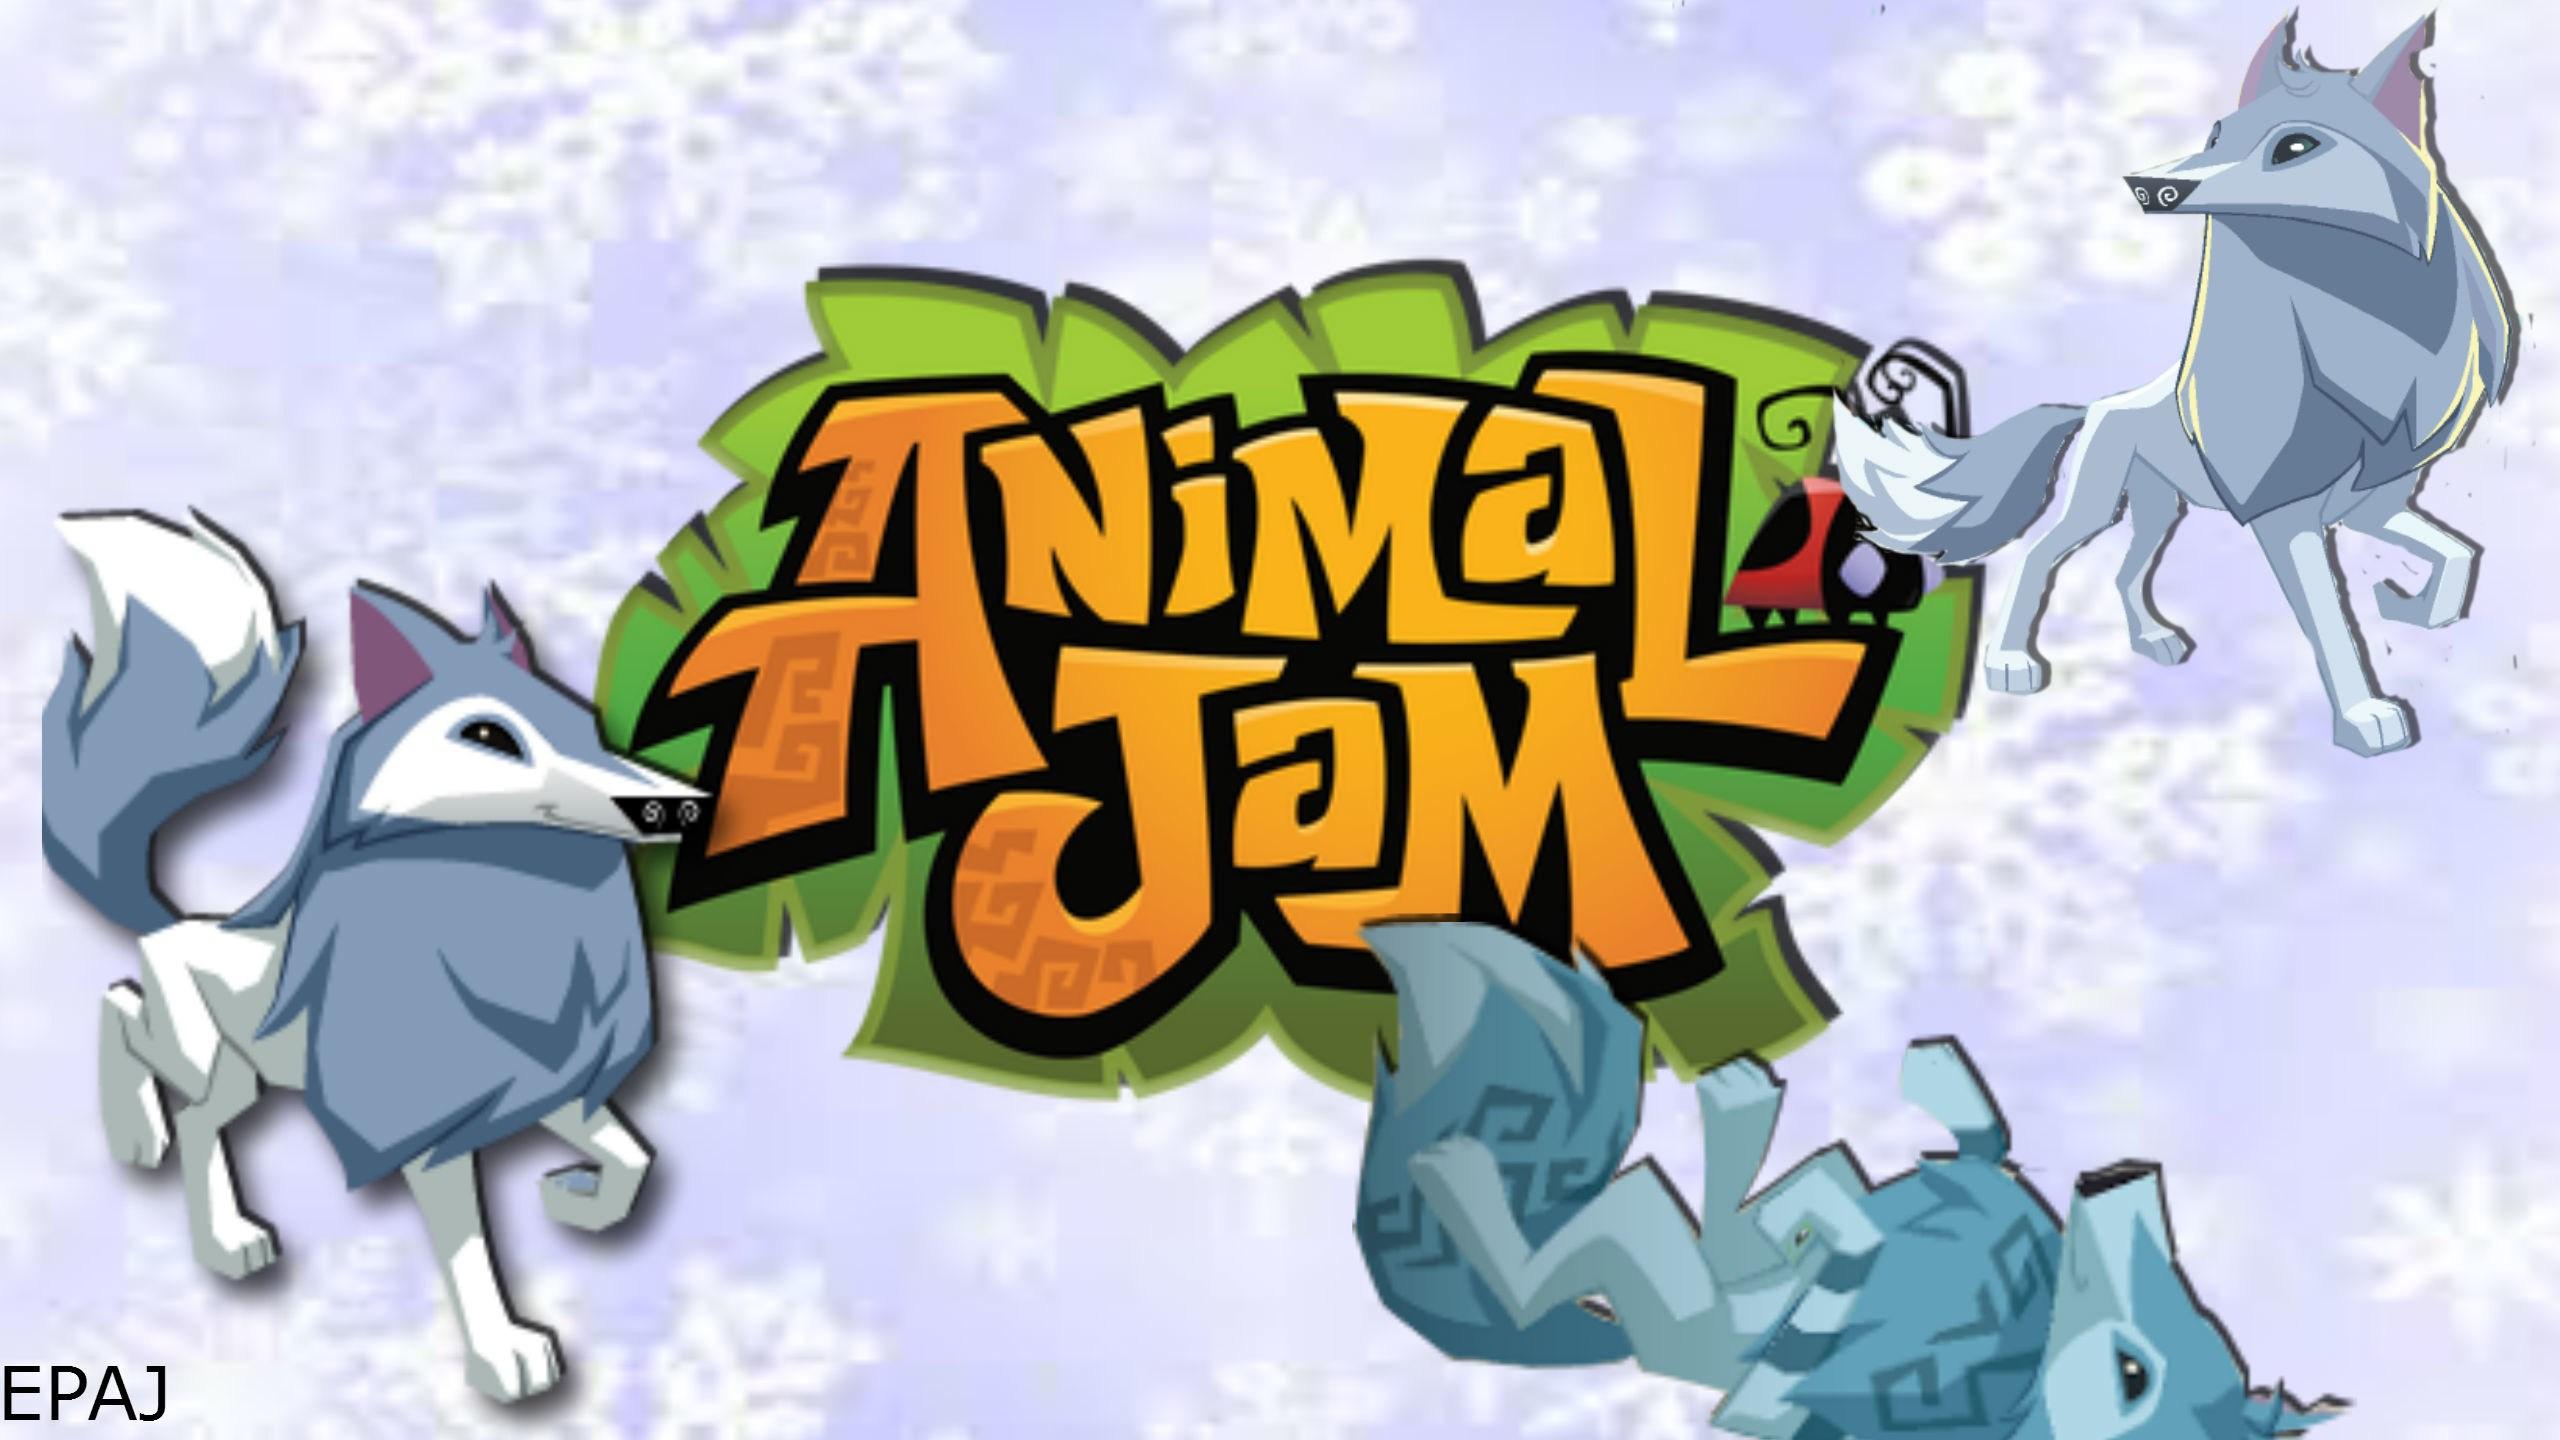 Masterpieces now as wallpaper or flooring in Animal Jam The community is  filled with talented artists that are now painting the floors  Instagram